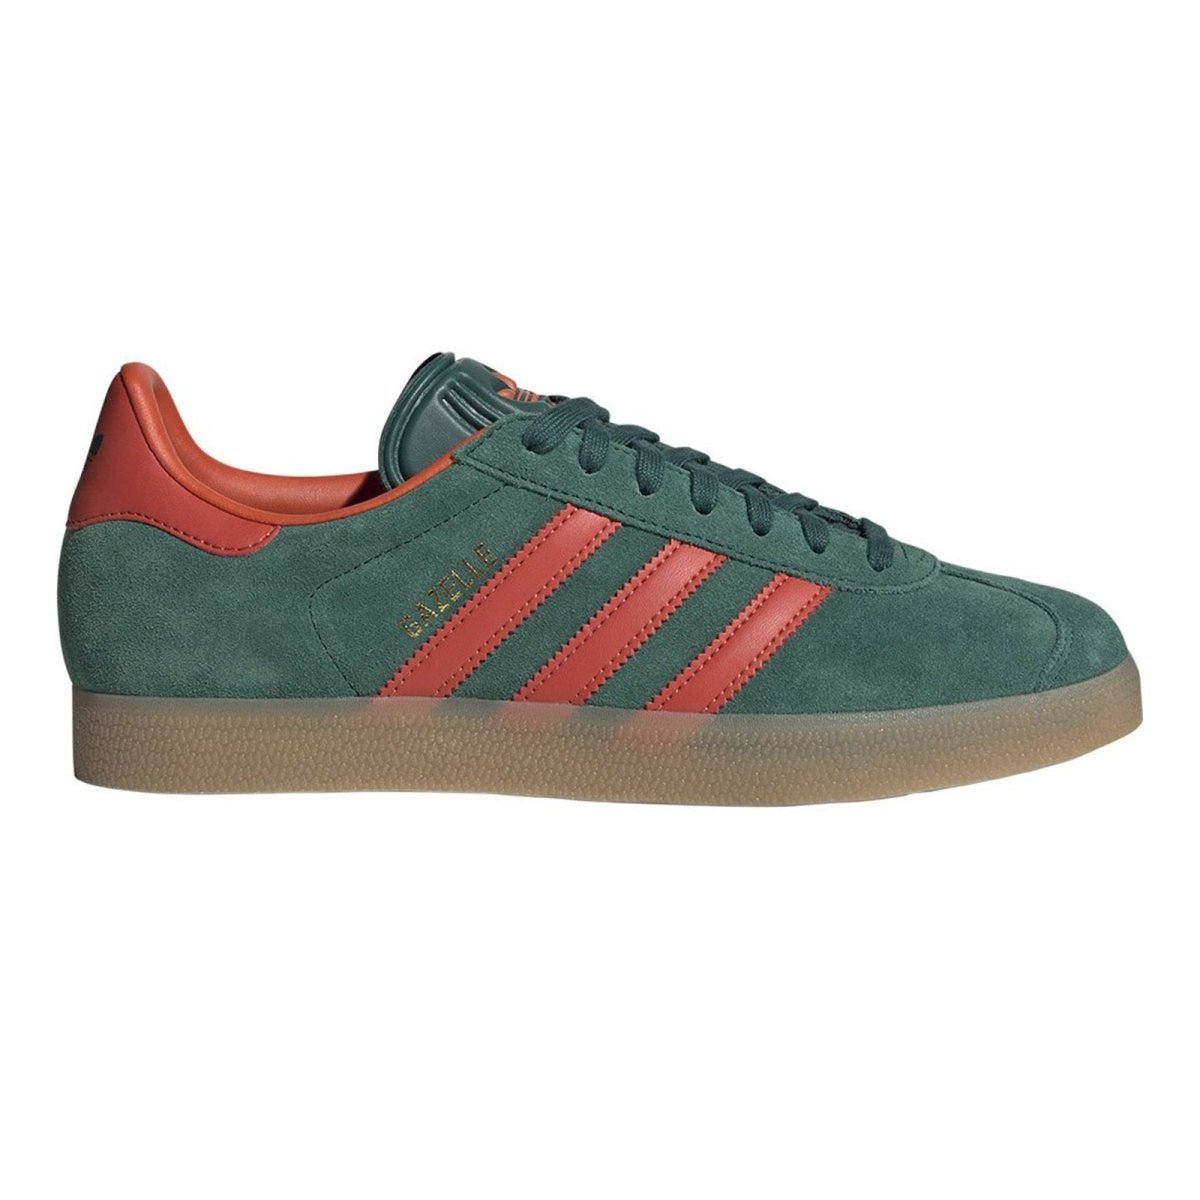 Adidas Men's Gazelle Olive/Red - 10038068 - West NYC